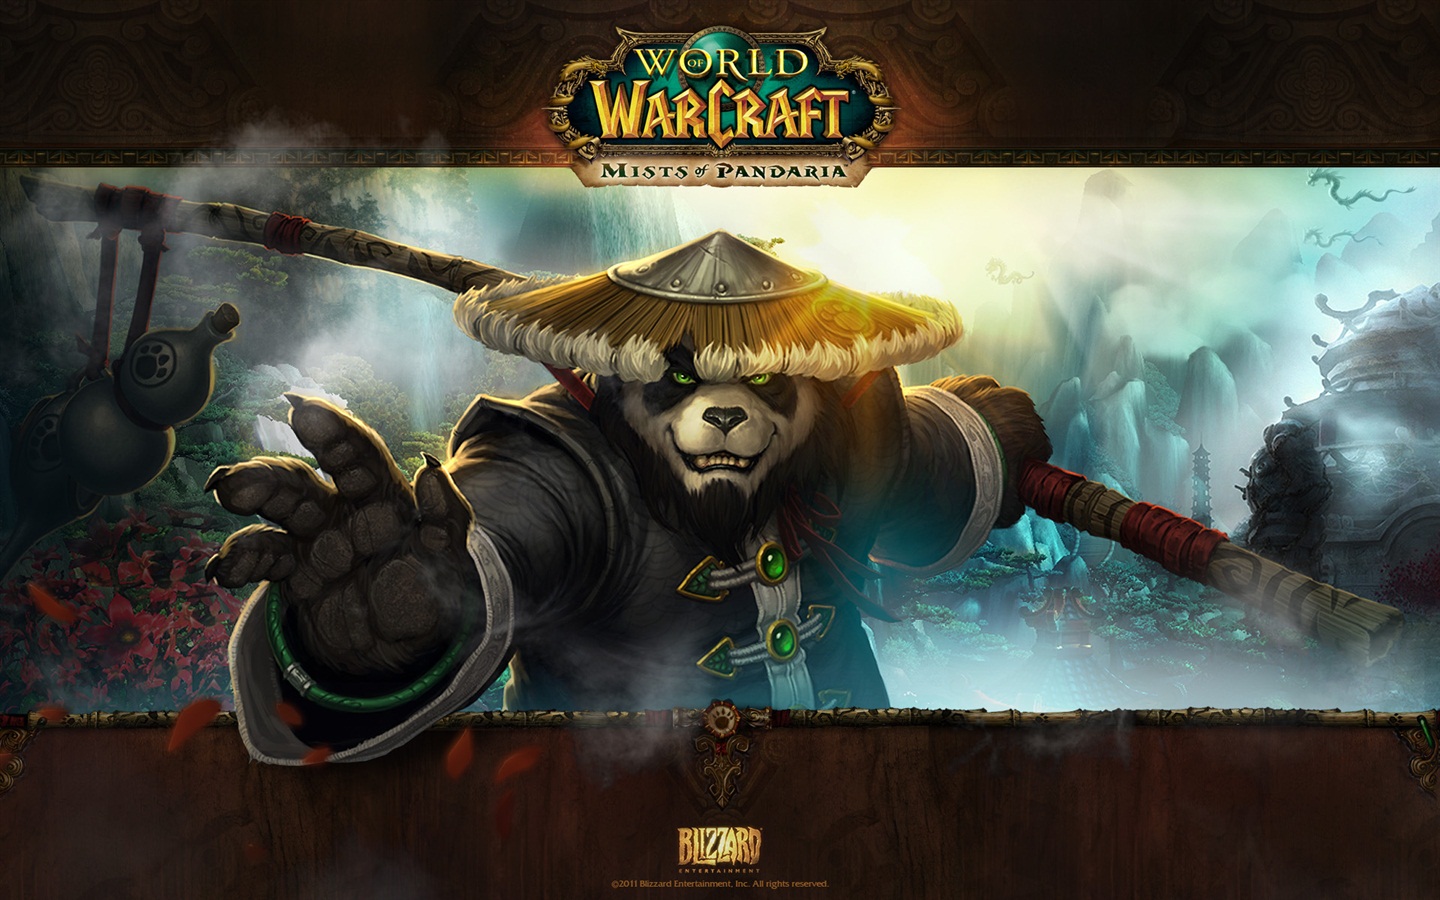 World of Warcraft: Mists of Pandaria HD wallpapers #1 - 1440x900